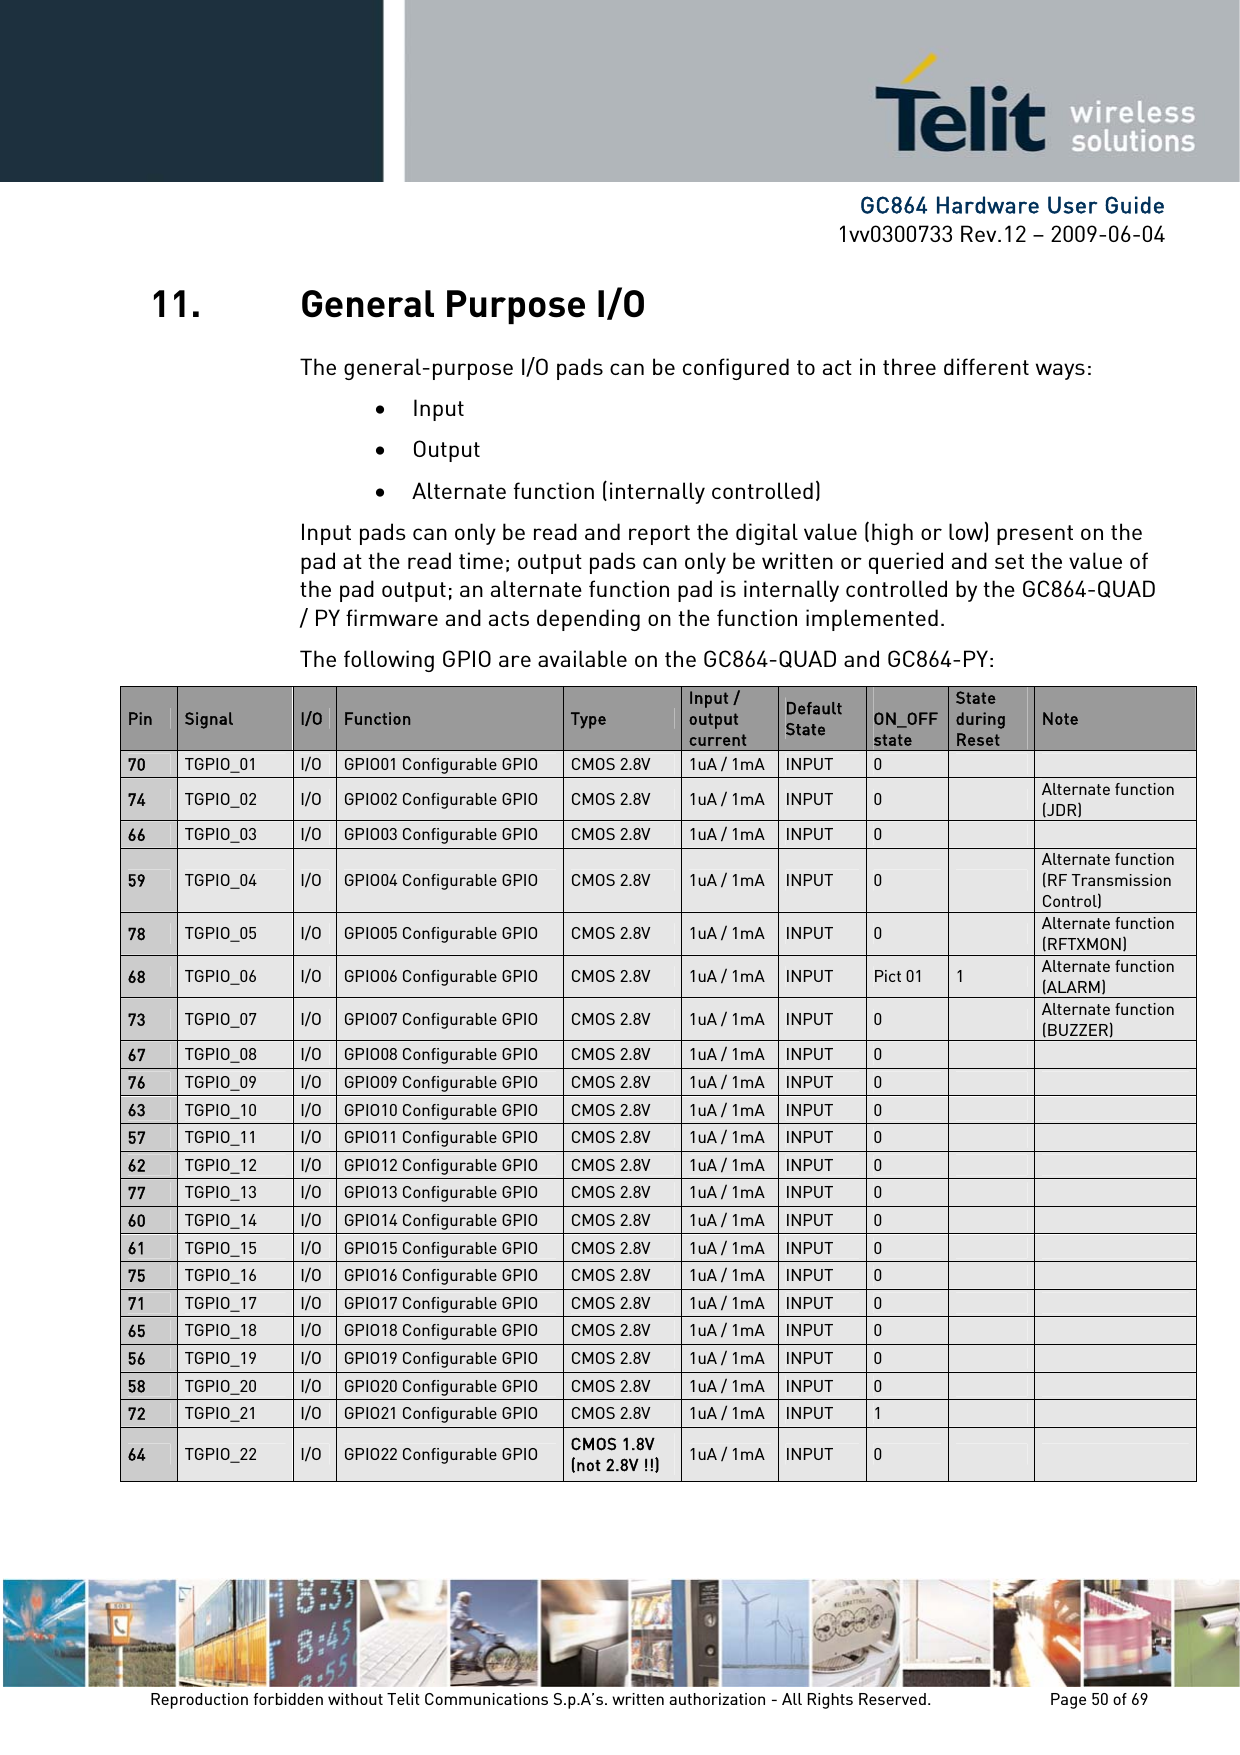      GC864 Hardware User Guide 1vv0300733 Rev.12 – 2009-06-04 11. General Purpose I/O The general-purpose I/O pads can be configured to act in three different ways: • Input • Output • Alternate function (internally controlled) Input pads can only be read and report the digital value (high or low) present on the pad at the read time; output pads can only be written or queried and set the value of the pad output; an alternate function pad is internally controlled by the GC864-QUAD / PY firmware and acts depending on the function implemented.  The following GPIO are available on the GC864-QUAD and GC864-PY: Pin  Signal  I/O  Function  Type Input / output current Default State  ON_OFF state State during Reset Note 70  TGPIO_01  I/O  GPIO01 Configurable GPIO  CMOS 2.8V  1uA / 1mA  INPUT  0     74  TGPIO_02  I/O  GPIO02 Configurable GPIO  CMOS 2.8V  1uA / 1mA  INPUT  0   Alternate function  (JDR) 66  TGPIO_03  I/O  GPIO03 Configurable GPIO  CMOS 2.8V  1uA / 1mA  INPUT  0     59  TGPIO_04  I/O  GPIO04 Configurable GPIO  CMOS 2.8V  1uA / 1mA  INPUT  0   Alternate function  (RF Transmission Control) 78  TGPIO_05  I/O  GPIO05 Configurable GPIO  CMOS 2.8V  1uA / 1mA  INPUT  0   Alternate function (RFTXMON) 68  TGPIO_06  I/O  GPIO06 Configurable GPIO  CMOS 2.8V  1uA / 1mA  INPUT  Pict 01  1  Alternate function (ALARM) 73  TGPIO_07  I/O  GPIO07 Configurable GPIO  CMOS 2.8V  1uA / 1mA  INPUT  0   Alternate function (BUZZER) 67  TGPIO_08  I/O  GPIO08 Configurable GPIO  CMOS 2.8V  1uA / 1mA  INPUT  0     76  TGPIO_09  I/O  GPIO09 Configurable GPIO  CMOS 2.8V  1uA / 1mA  INPUT  0     63  TGPIO_10  I/O  GPIO10 Configurable GPIO  CMOS 2.8V  1uA / 1mA  INPUT  0     57  TGPIO_11  I/O  GPIO11 Configurable GPIO  CMOS 2.8V  1uA / 1mA  INPUT  0     62  TGPIO_12  I/O  GPIO12 Configurable GPIO  CMOS 2.8V  1uA / 1mA  INPUT  0     77  TGPIO_13  I/O  GPIO13 Configurable GPIO  CMOS 2.8V  1uA / 1mA  INPUT  0     60  TGPIO_14  I/O  GPIO14 Configurable GPIO  CMOS 2.8V  1uA / 1mA  INPUT  0     61  TGPIO_15  I/O  GPIO15 Configurable GPIO  CMOS 2.8V  1uA / 1mA  INPUT  0     75  TGPIO_16  I/O  GPIO16 Configurable GPIO  CMOS 2.8V  1uA / 1mA  INPUT  0     71  TGPIO_17  I/O  GPIO17 Configurable GPIO  CMOS 2.8V  1uA / 1mA  INPUT  0     65  TGPIO_18  I/O  GPIO18 Configurable GPIO  CMOS 2.8V  1uA / 1mA  INPUT  0     56  TGPIO_19  I/O  GPIO19 Configurable GPIO  CMOS 2.8V  1uA / 1mA  INPUT  0     58  TGPIO_20  I/O  GPIO20 Configurable GPIO  CMOS 2.8V  1uA / 1mA  INPUT  0     72  TGPIO_21  I/O  GPIO21 Configurable GPIO  CMOS 2.8V 1uA / 1mA  INPUT  1     64  TGPIO_22  I/O  GPIO22 Configurable GPIO  CMOS 1.8V (not 2.8V !!) 1uA / 1mA  INPUT  0      Reproduction forbidden without Telit Communications S.p.A’s. written authorization - All Rights Reserved.    Page 50 of 69  